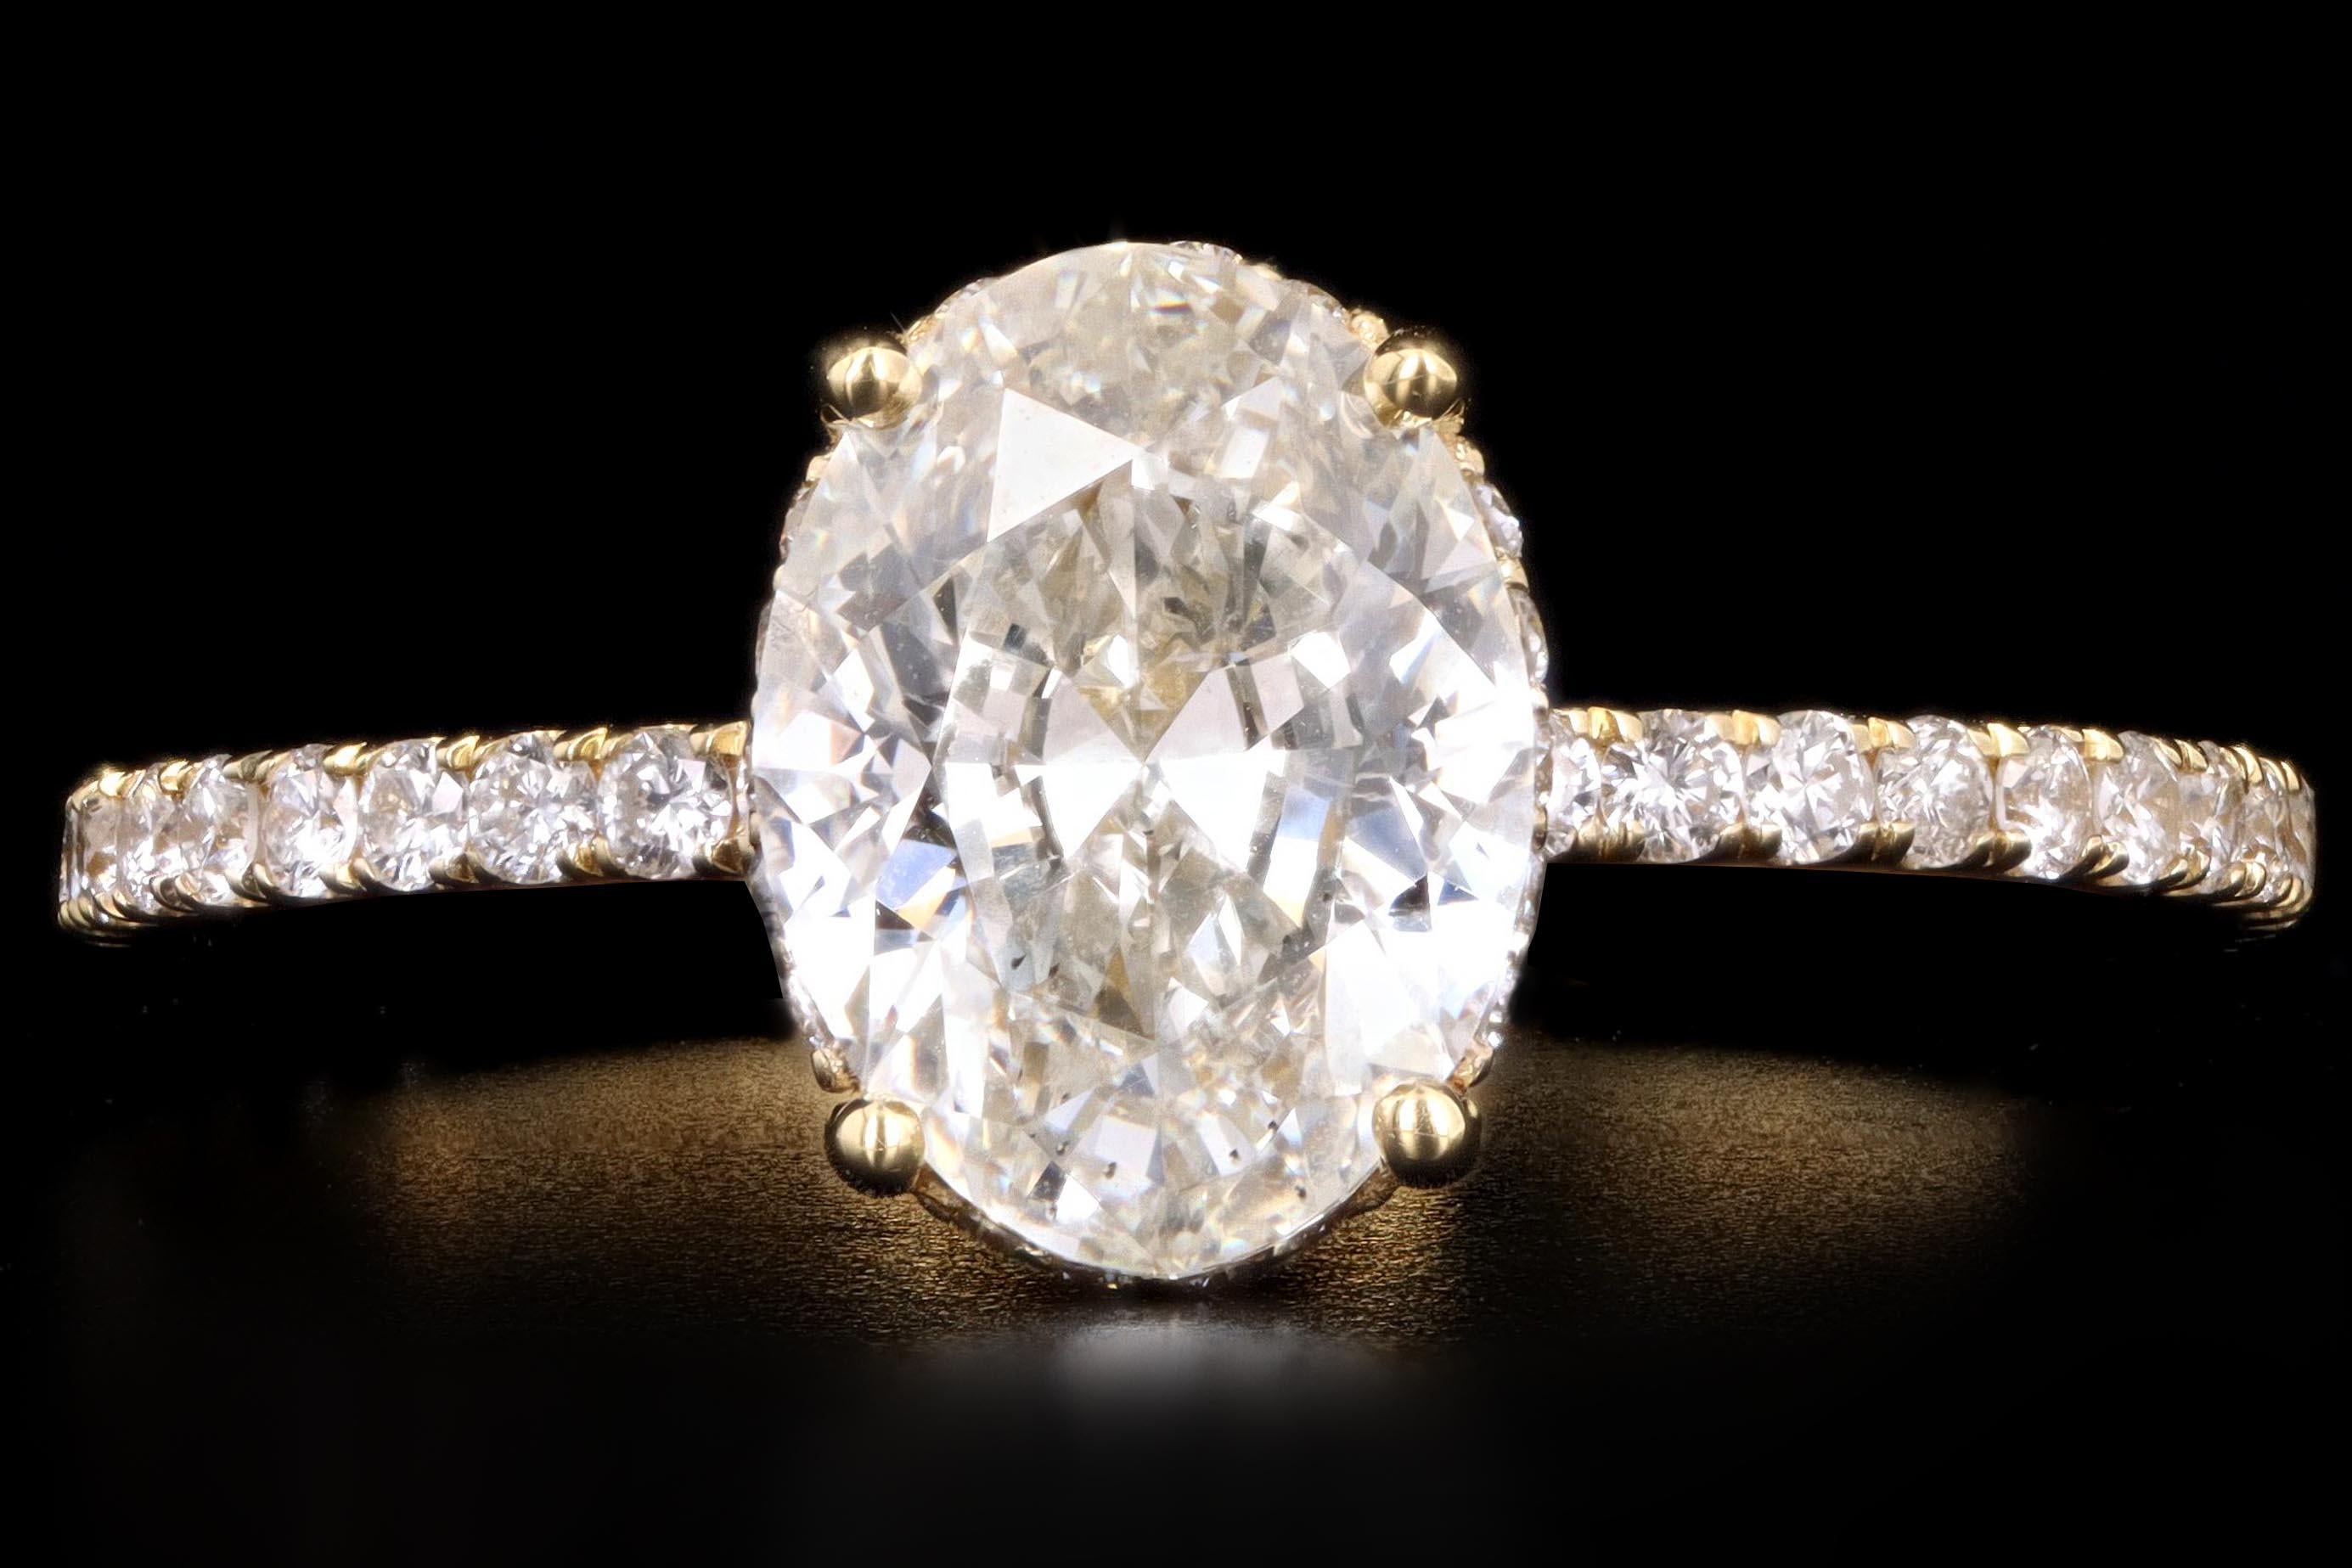 Era: New

Composition: 18K Yellow Gold

Primary Stone: Oval Cut Diamond

Carat Weight: 1.50 Carats

Color: J

Clarity: SI2

Accent Stones: 50 Round Brilliant Cut Diamonds

Carat Weight: .35 Carats

Color: G-H

Clarity: Vs1/2

Total Carat Weight: